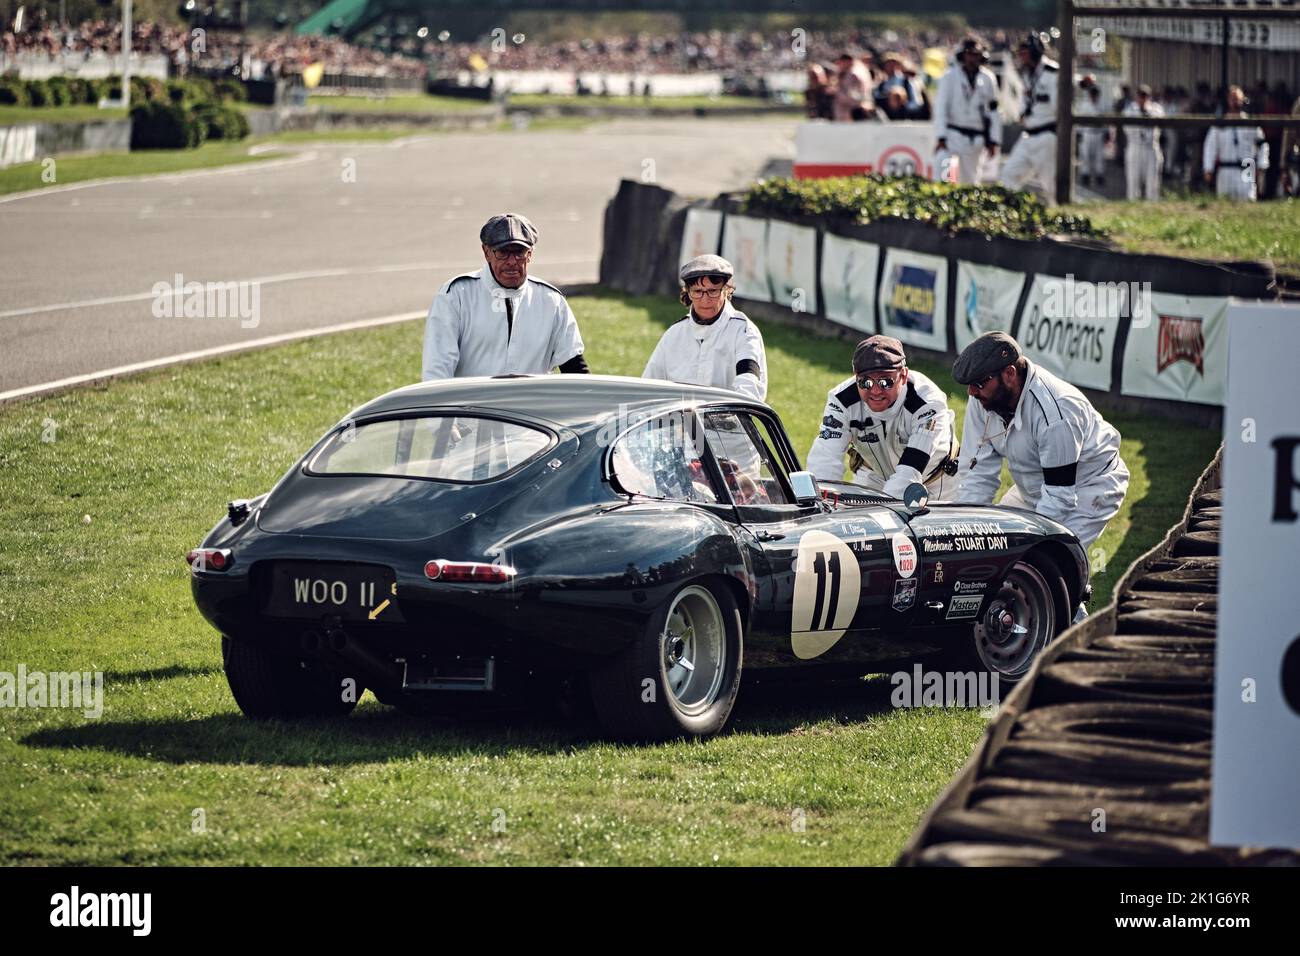 Goodwood, Chichester, UK. 18th Sept, 2022. Royal Automobile Club TT Celebration Marshalls help Jochen Mass / Nikolaus Ditting during the 2022 Goodwood Revival (Photo by Gergo Toth / Alamy Live News) Stock Photo